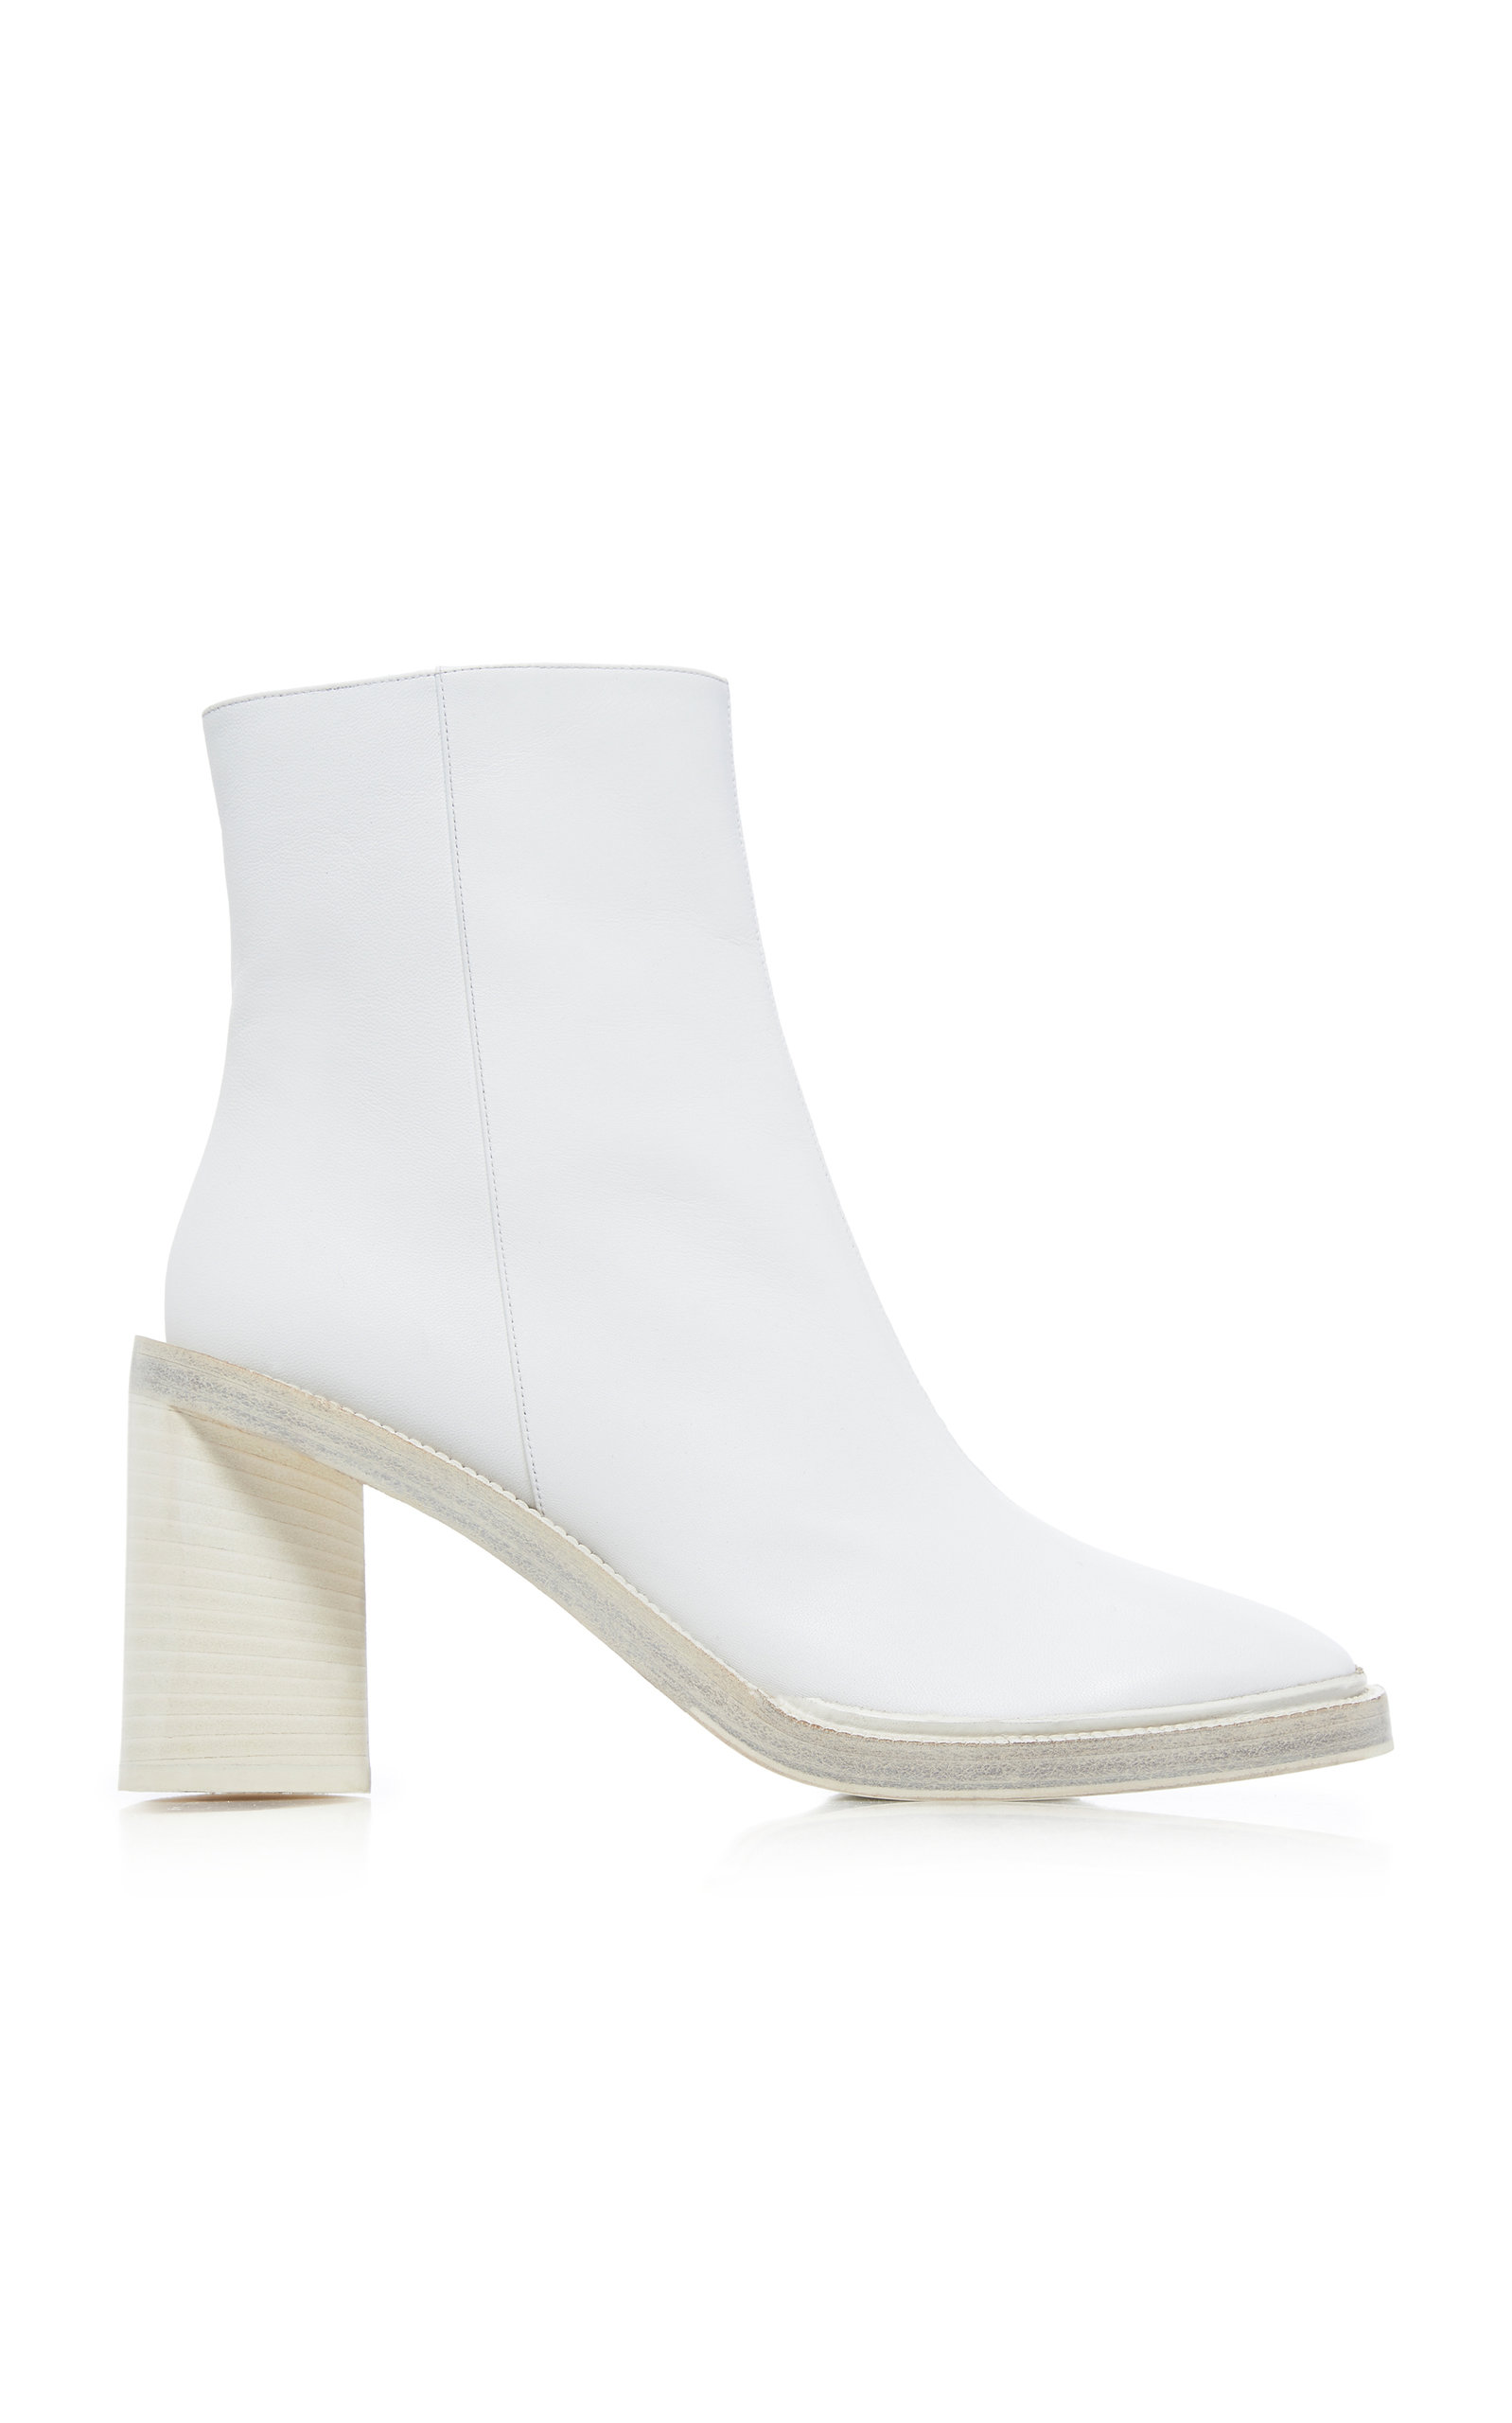 acne white boots